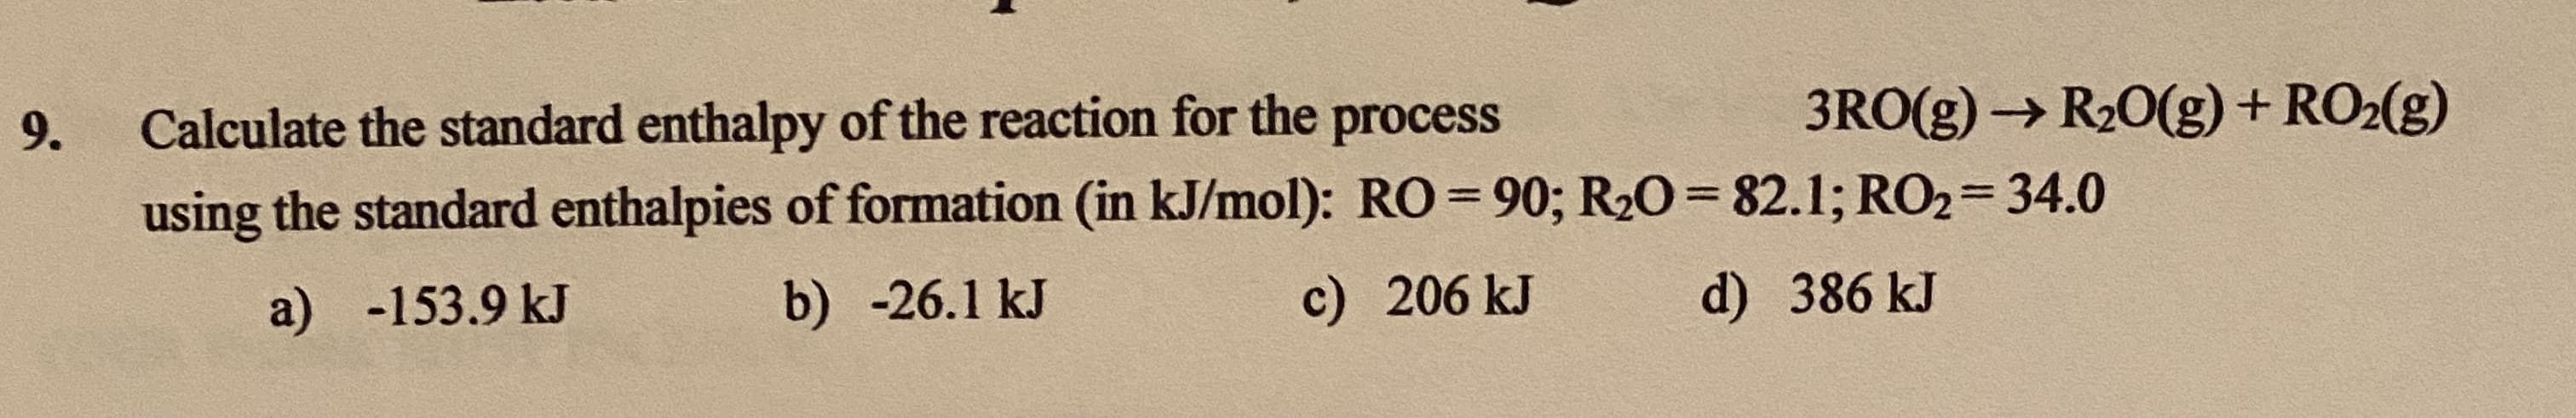 Calculate the standard enthalpy of the reaction for the process
3RO(g) → R20(g) + RO2(g)
using the standard enthalpies of formation (in kJ/mol): RO= 90; R20= 82.1; RO2=34.0
a) -153.9 kJ
b) -26.1 kJ
c) 206 kJ
d) 386 kJ
